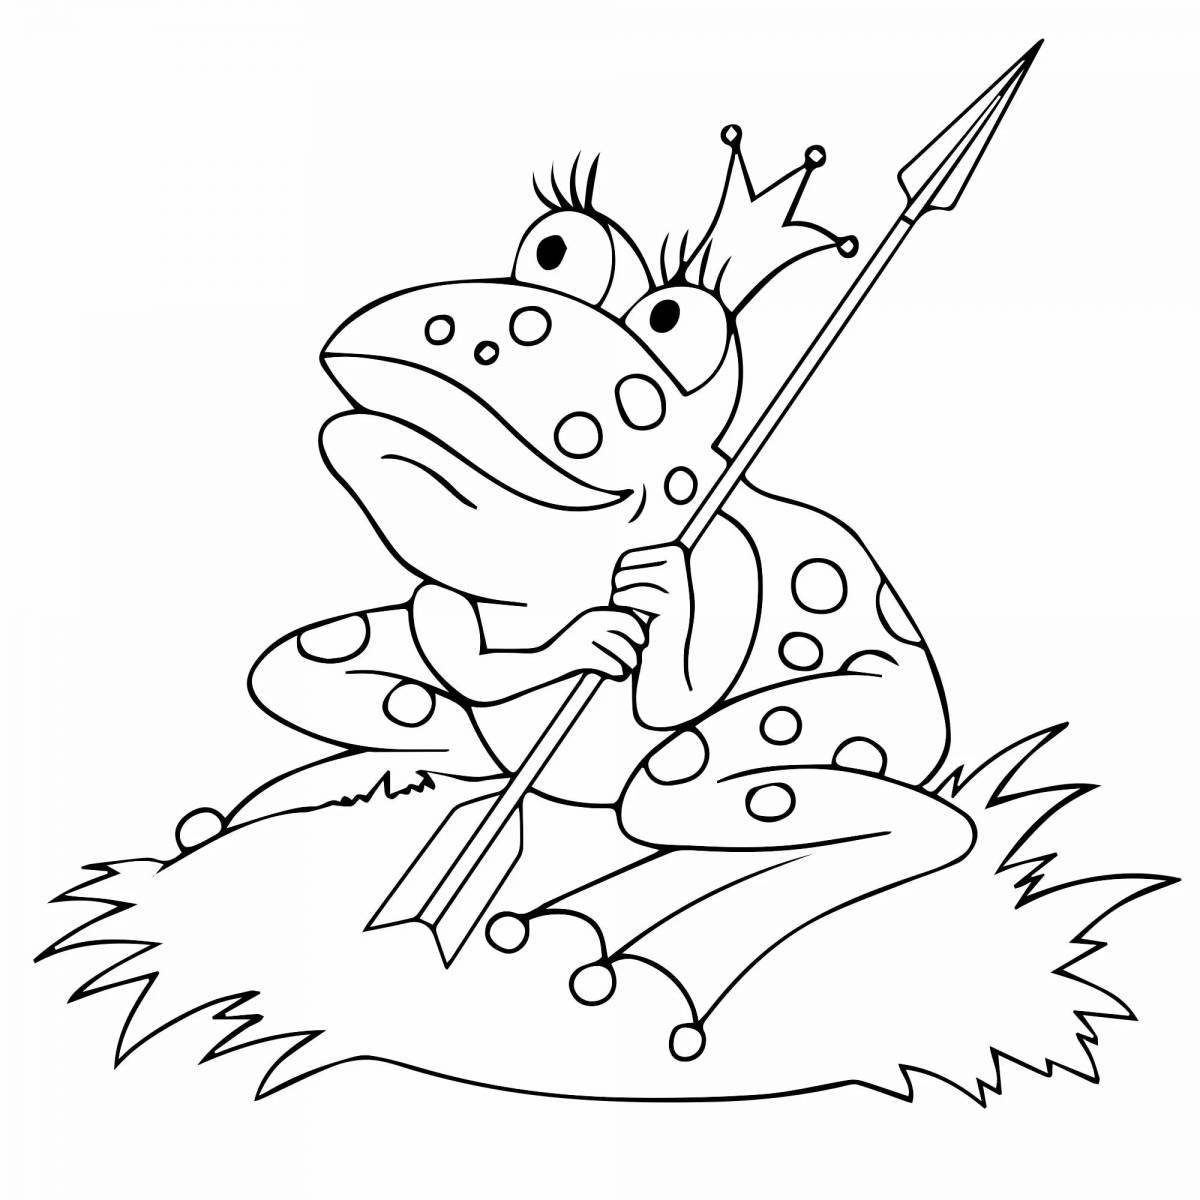 Exquisite fairy tale cover coloring pages